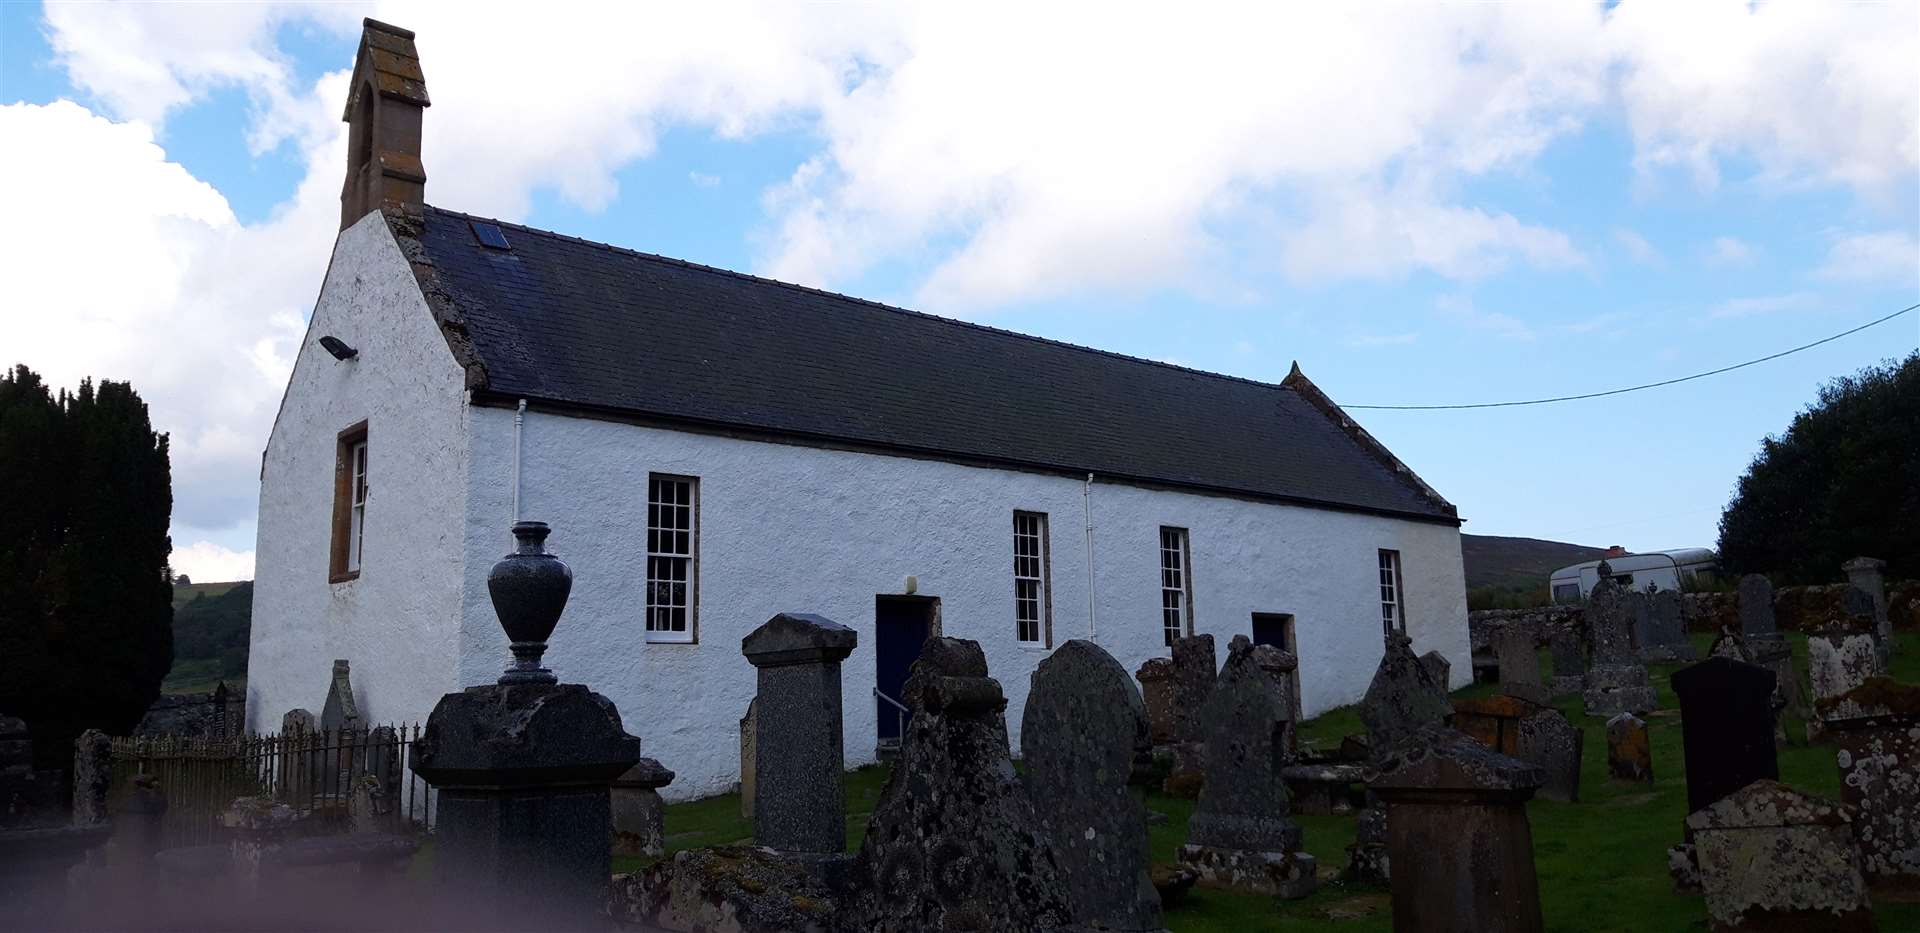 St Callan’s Church is located 1.5 miles north of Rogart.